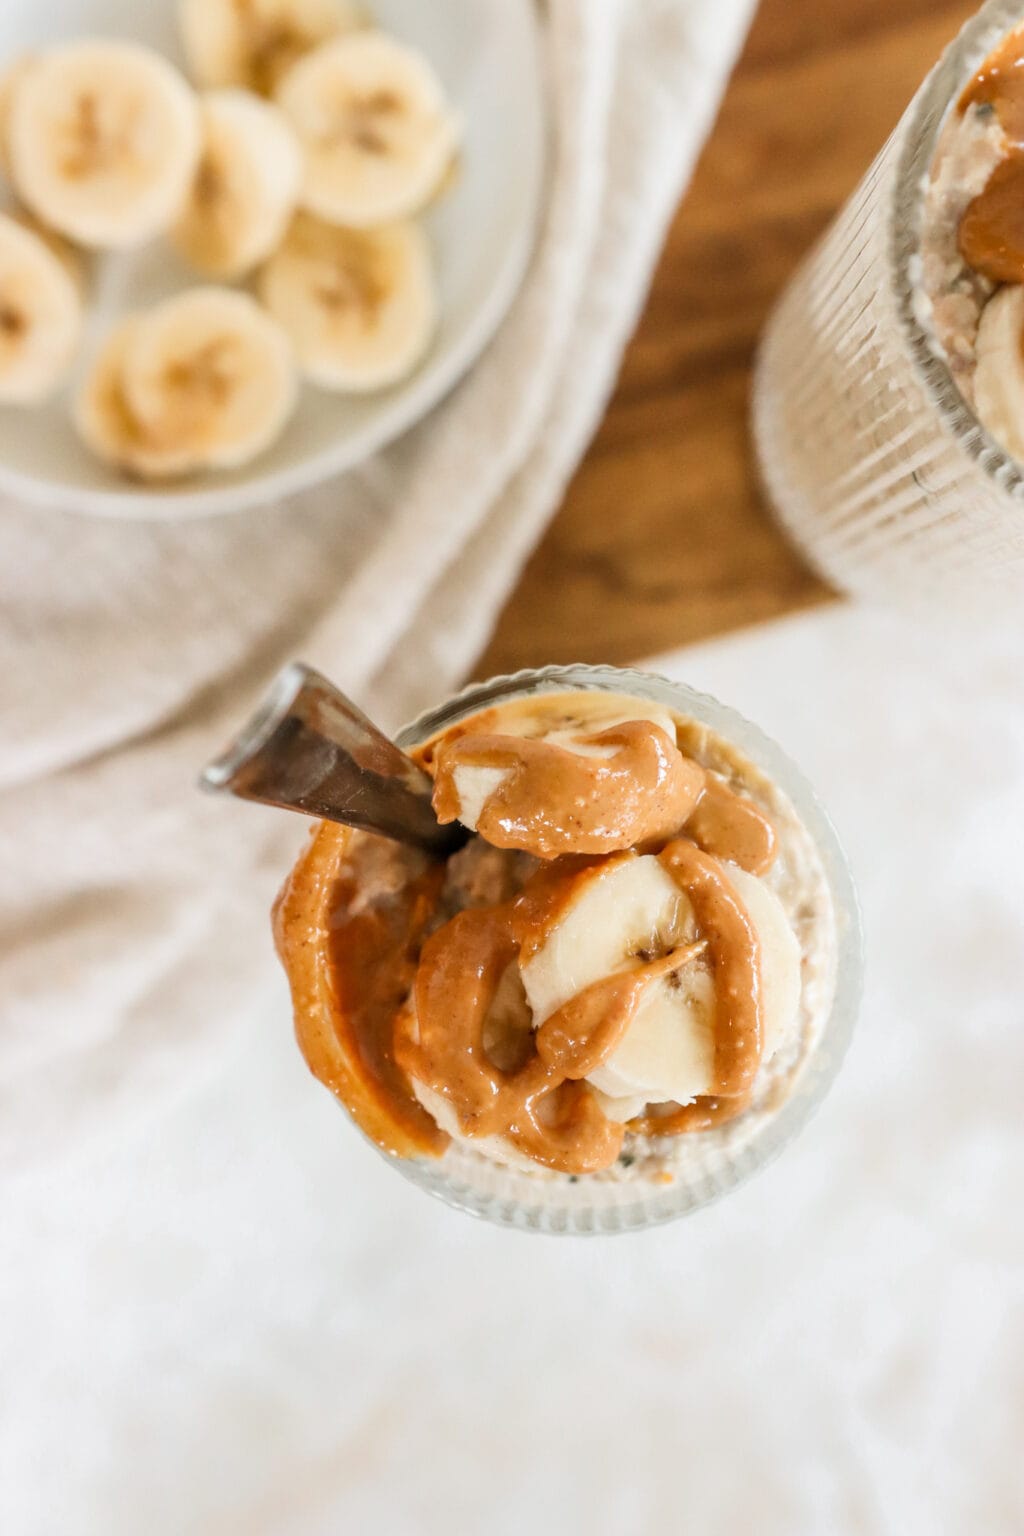 Peanut Butter & Banana Kefir Overnight Oats in two glass cups on a wood cutting board with sliced banana on the side